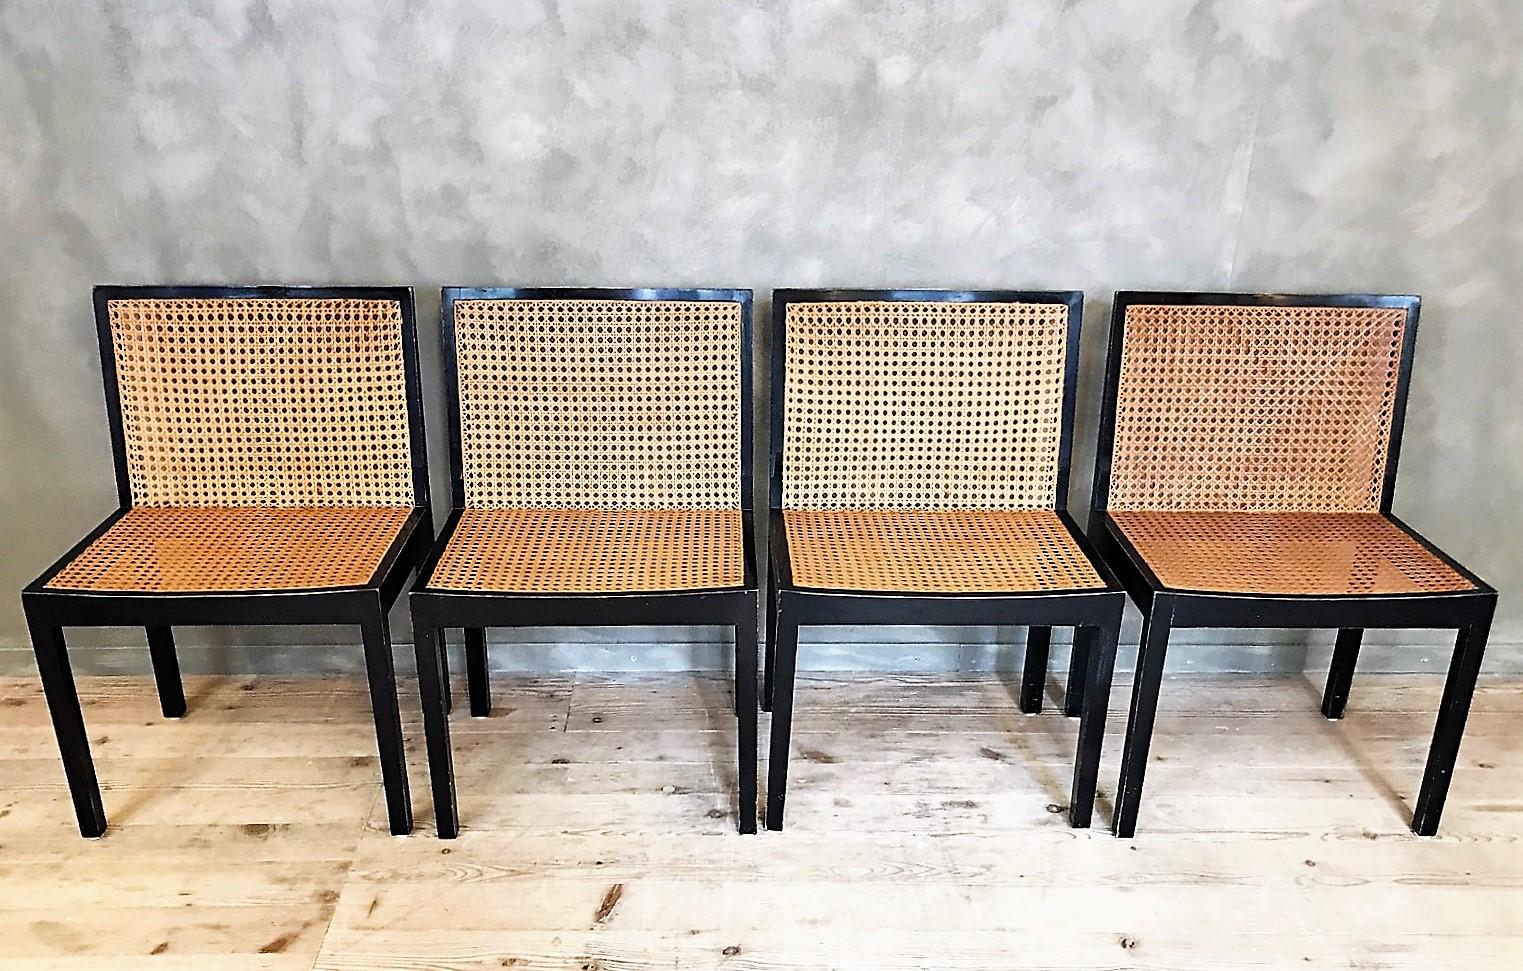 This is a special edition (presumably a prototype of the well-known model) of Willy Guhl's famous chair, which forms a continuous bench. These four chairs were a gift from Willy Guhl to a Zurich architect who was a close friend. They were used in